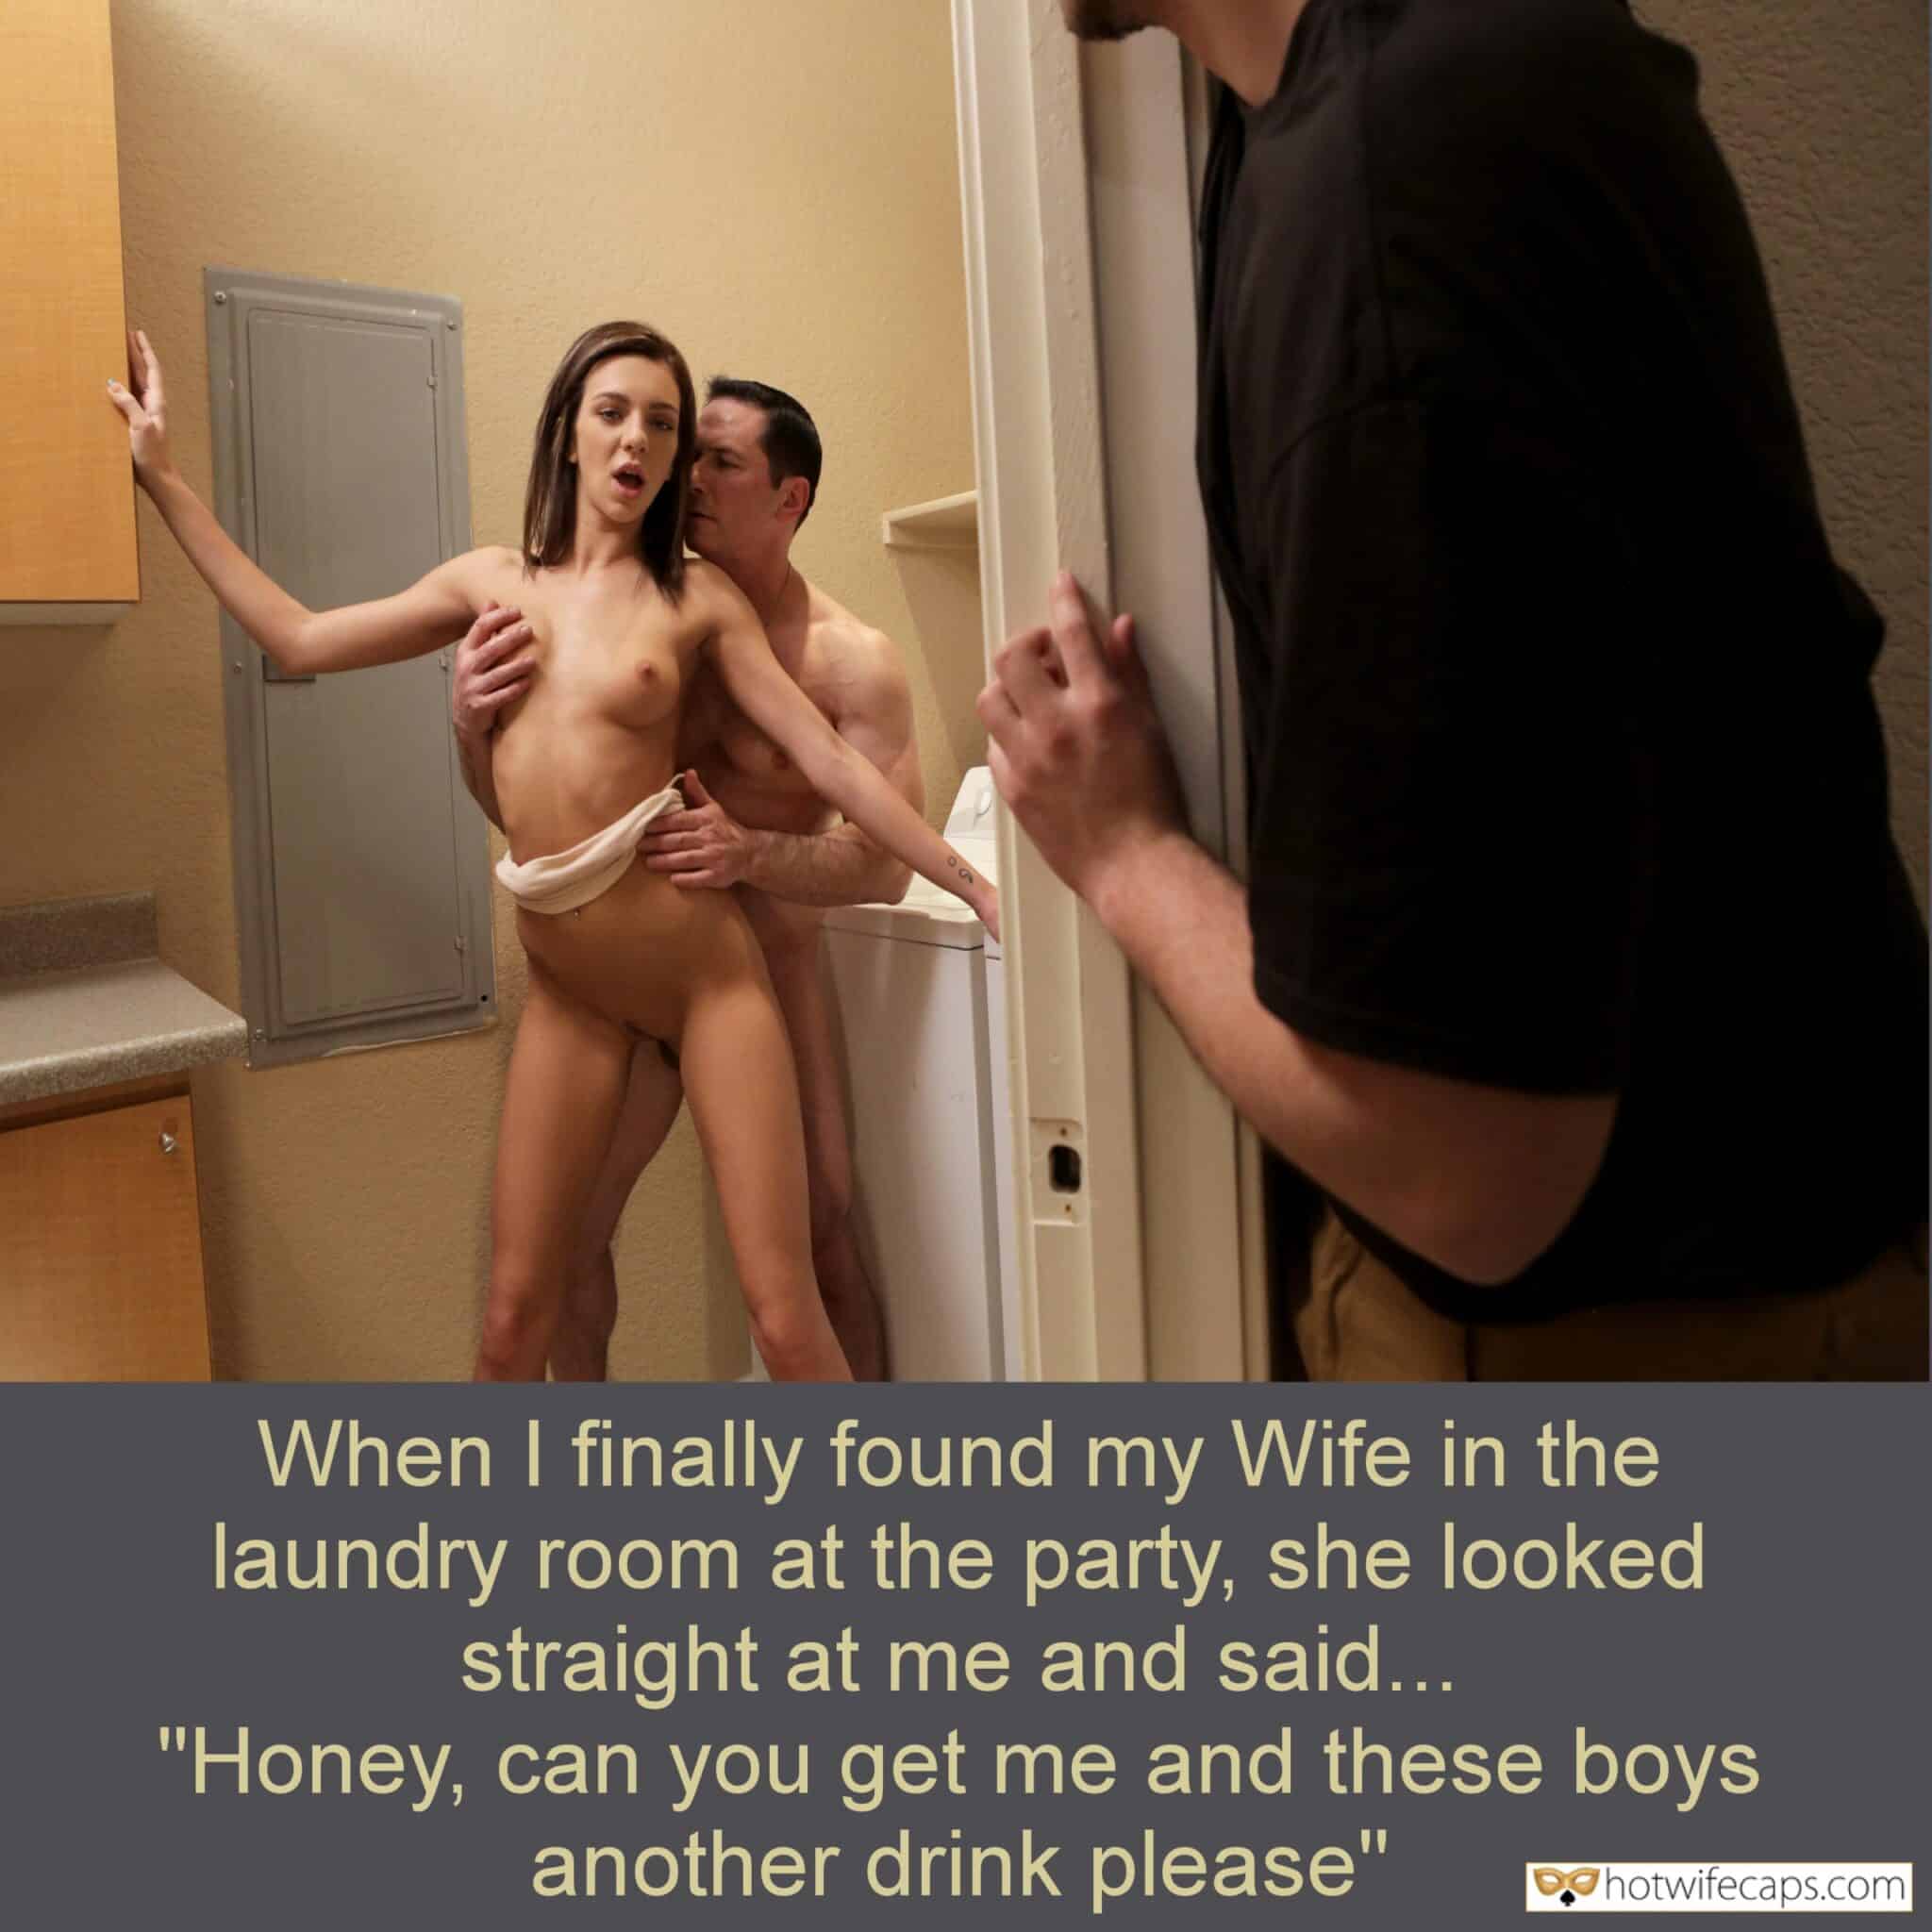 Public Humiliation Femdom Cheating hotwife caption: When I finally found my Wife in the laundry room at the party, she looked straight at me and said… “Honey, can you get me and these boys another drink please” When I Caught Her Fucking Bitch Refused to Stop